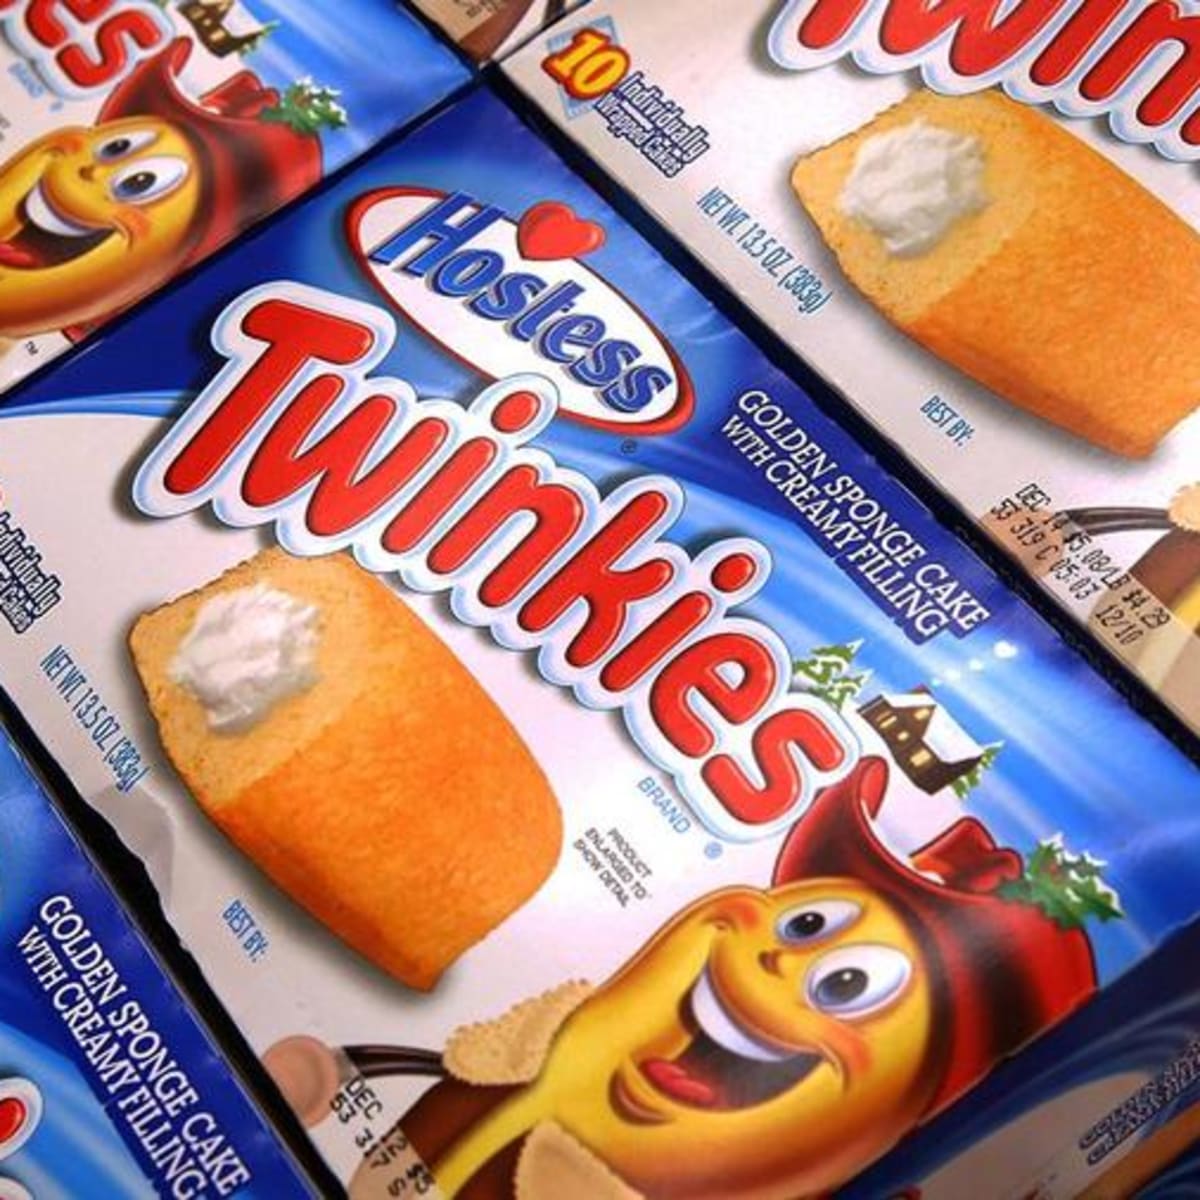 Ultimate Twinkie Variety Pack With Zingers